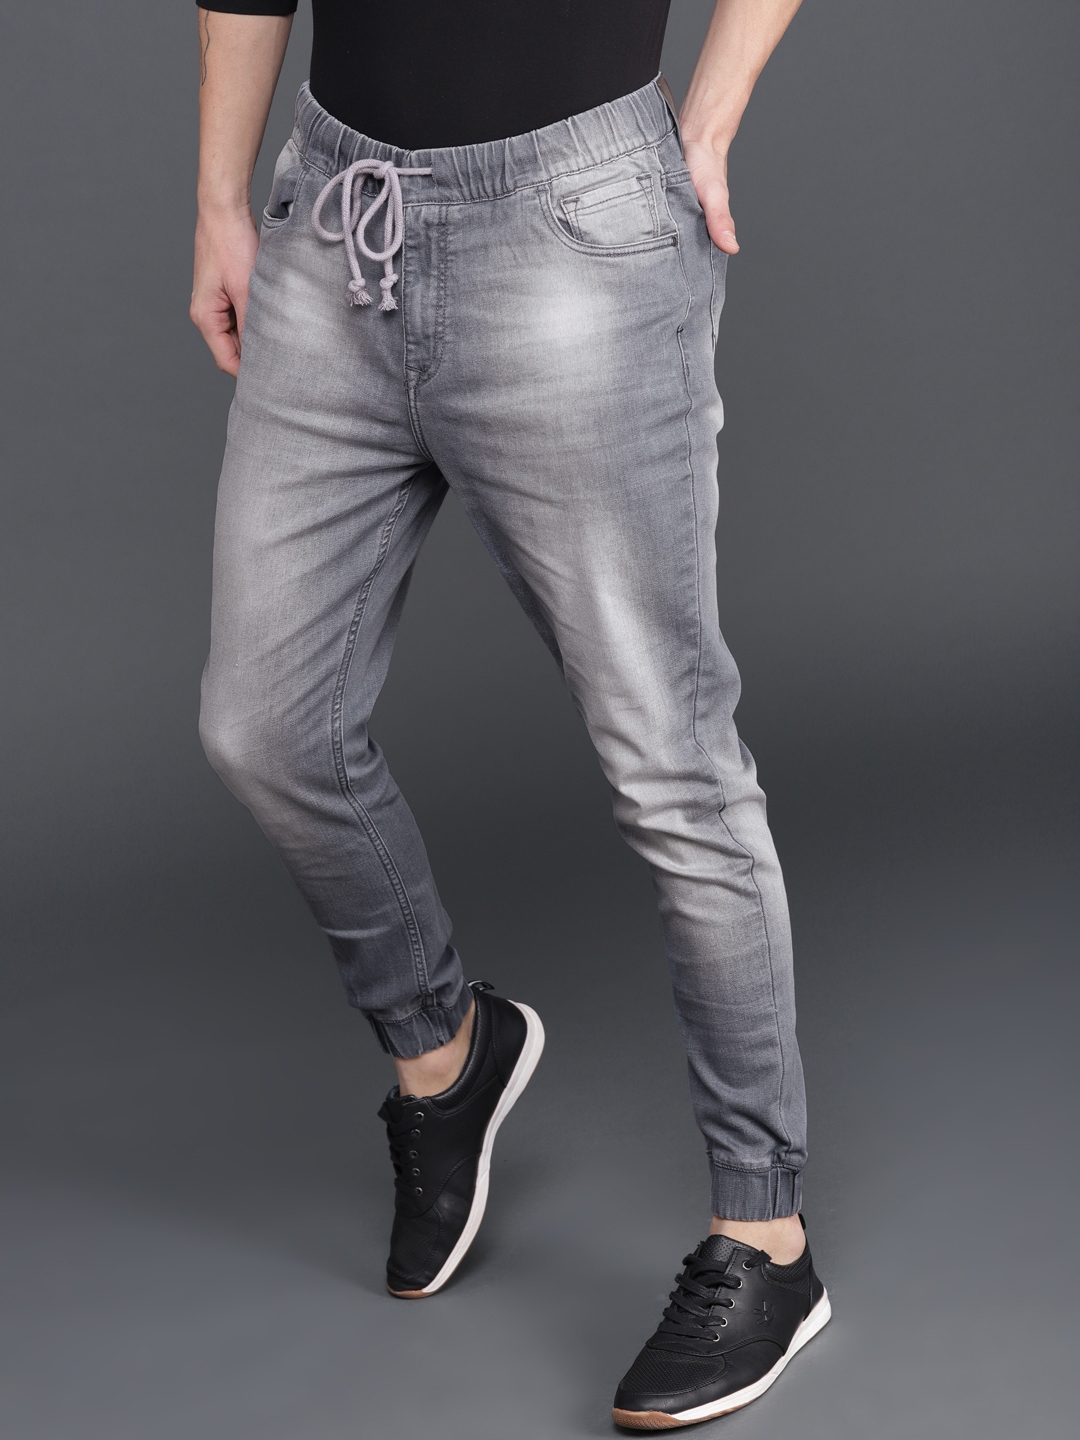 Buy Ketch Light Grey Jogger Stretchable Jeans for Men Online at Rs769   Ketch